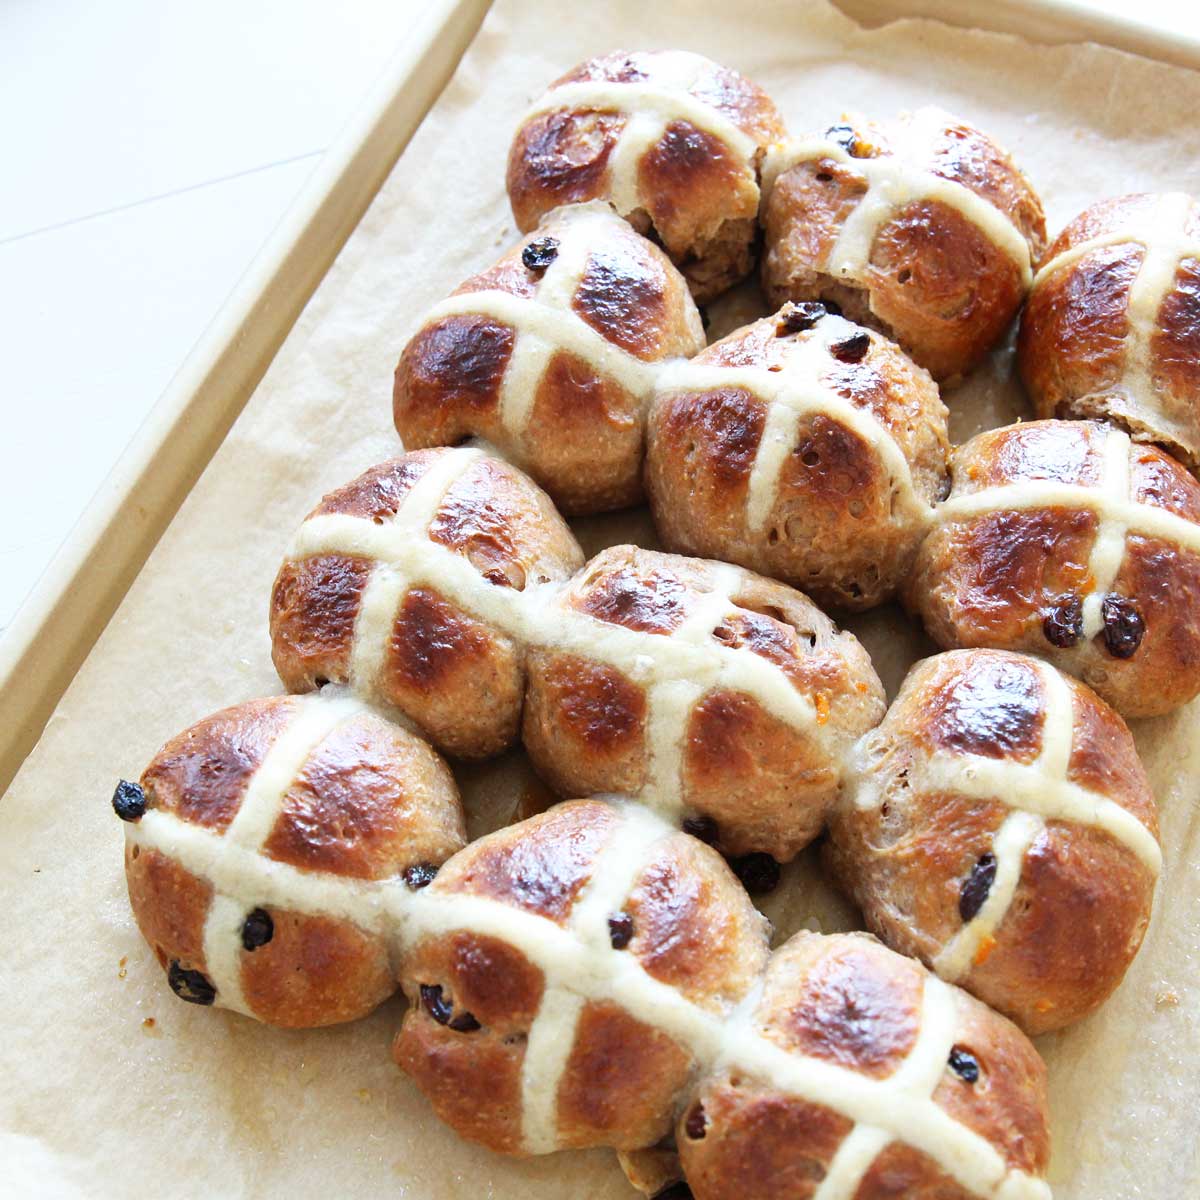 Soft & Fluffy Ricotta Cheese Hot Cross Buns - Perfect for Easter! - Sweet Corn Flatbread